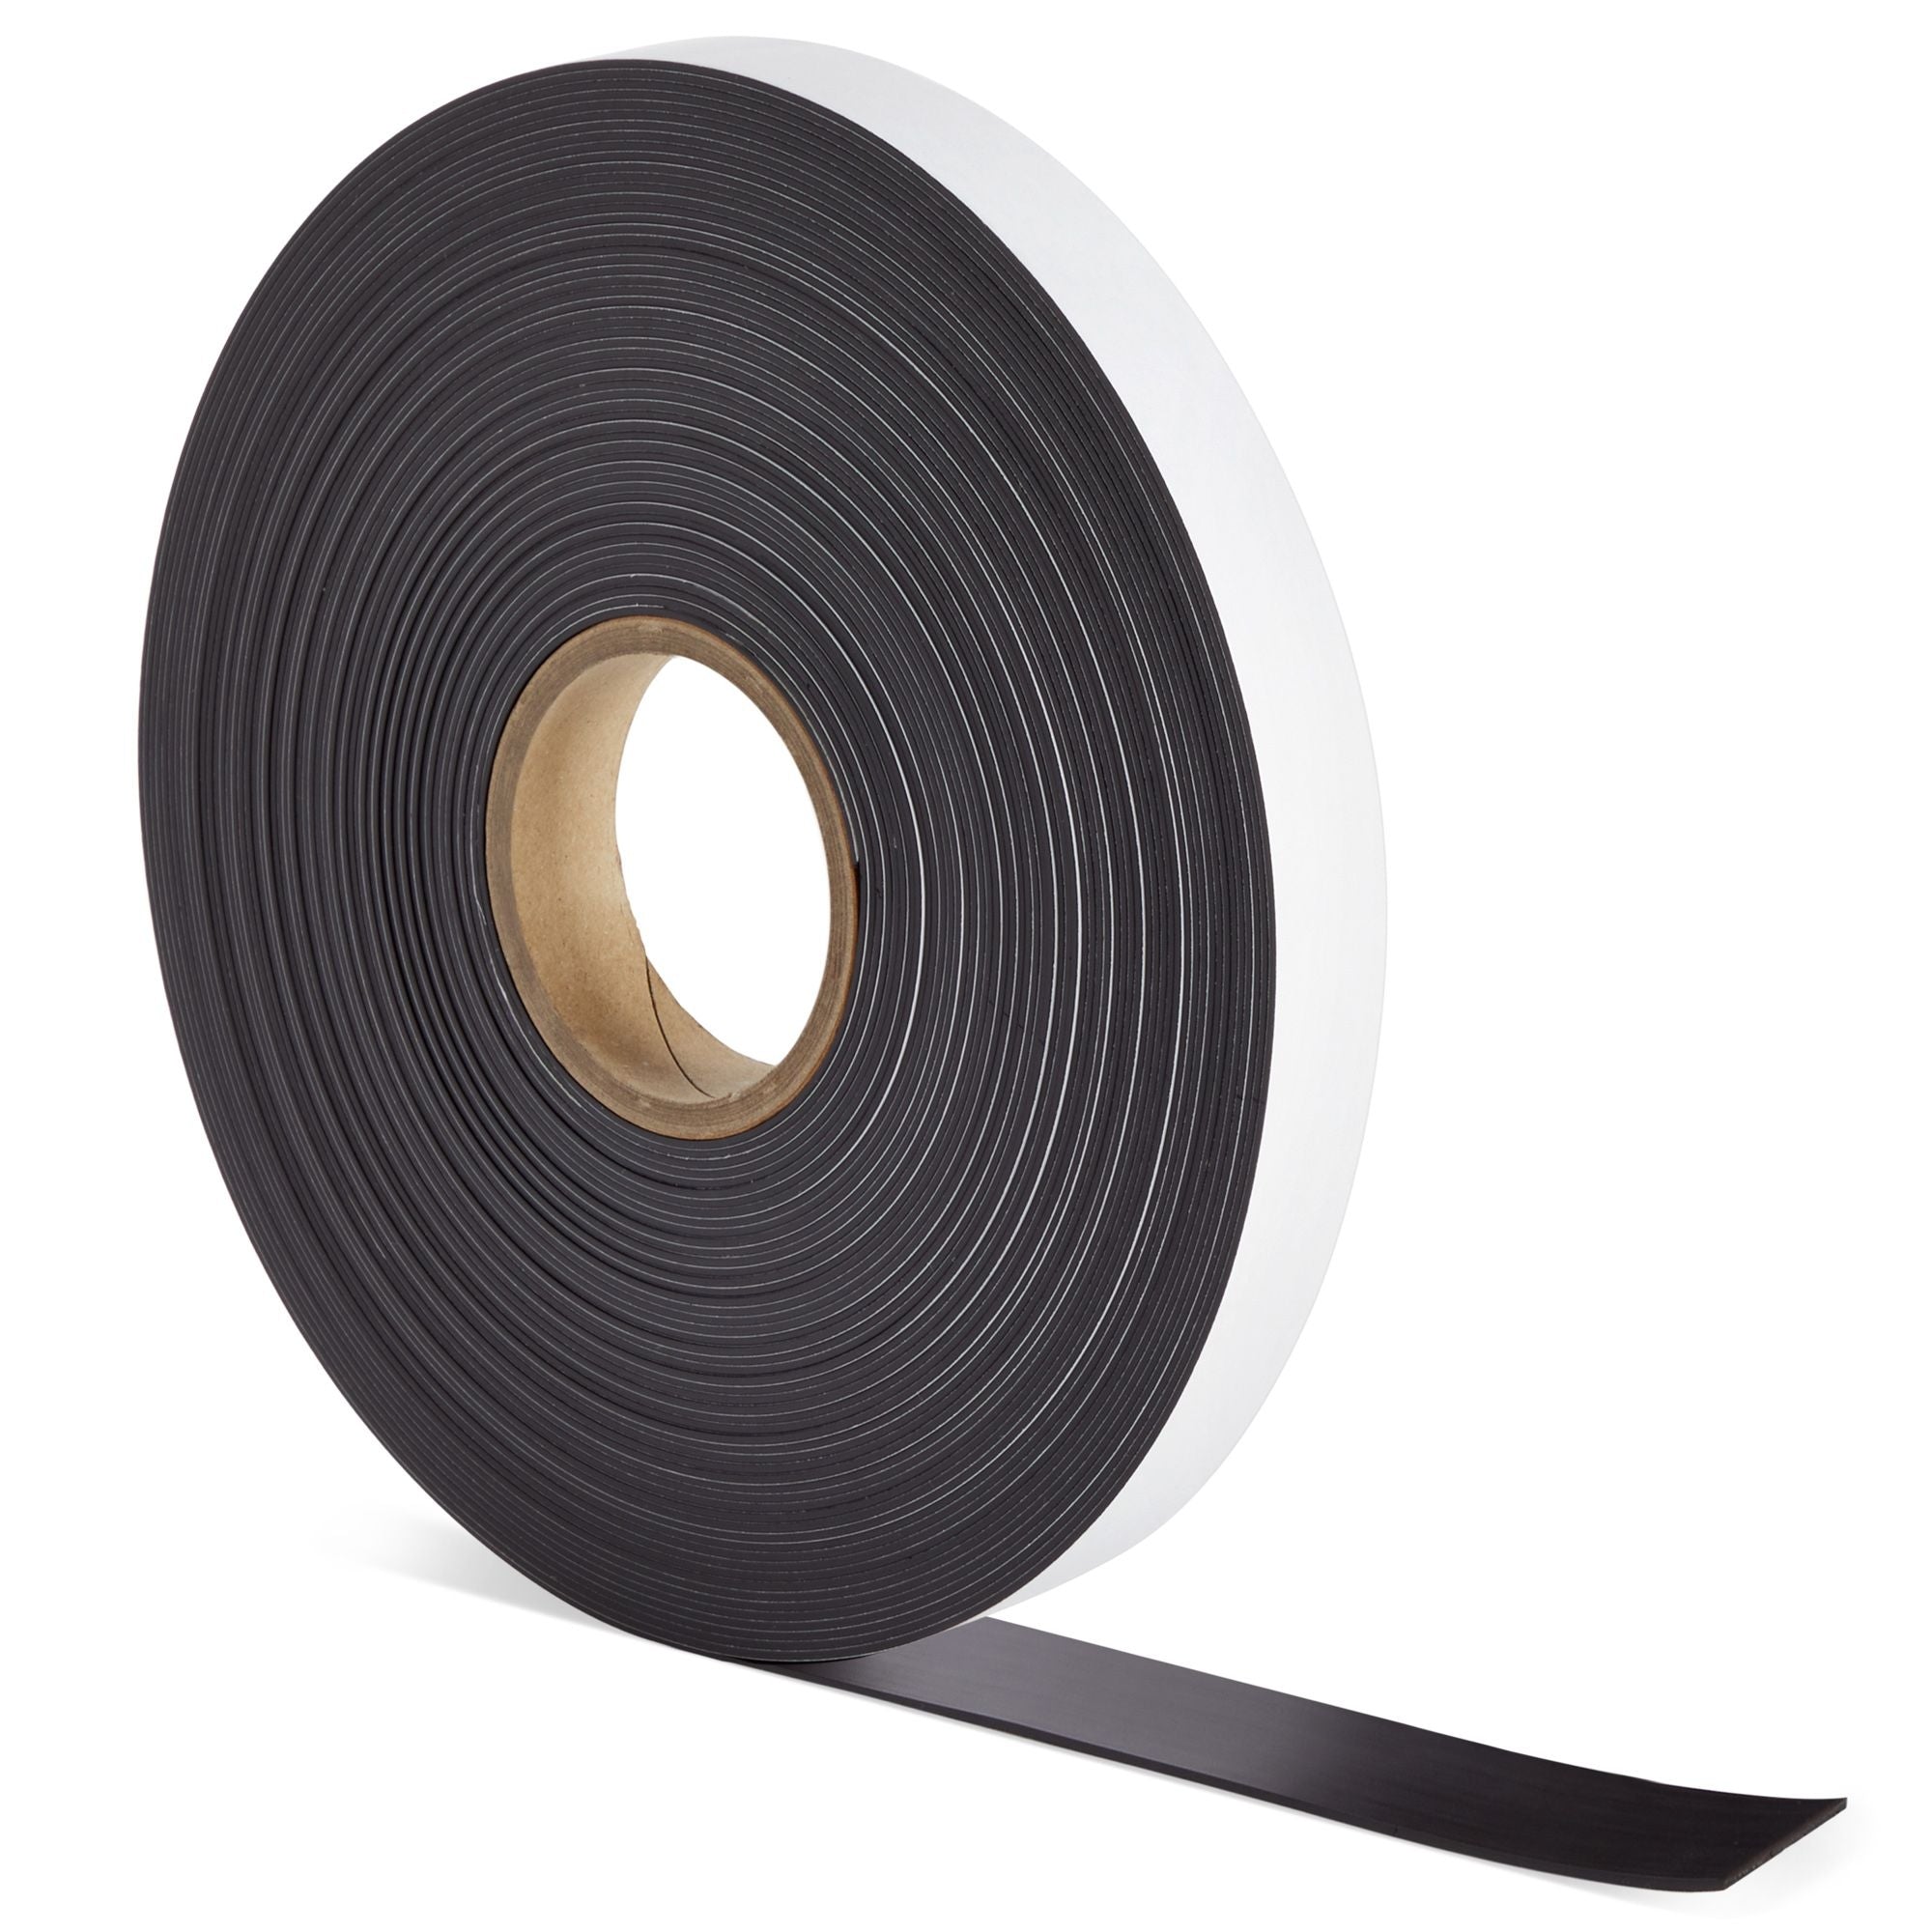  Flexible Magnetic Tape - 1 Inch x 10 Feet Magnetic Strip with  Strong Self Adhesive - Ideal Magnetic Roll for Craft and DIY Projects -  Sticky Magnets for Fridge and Dry